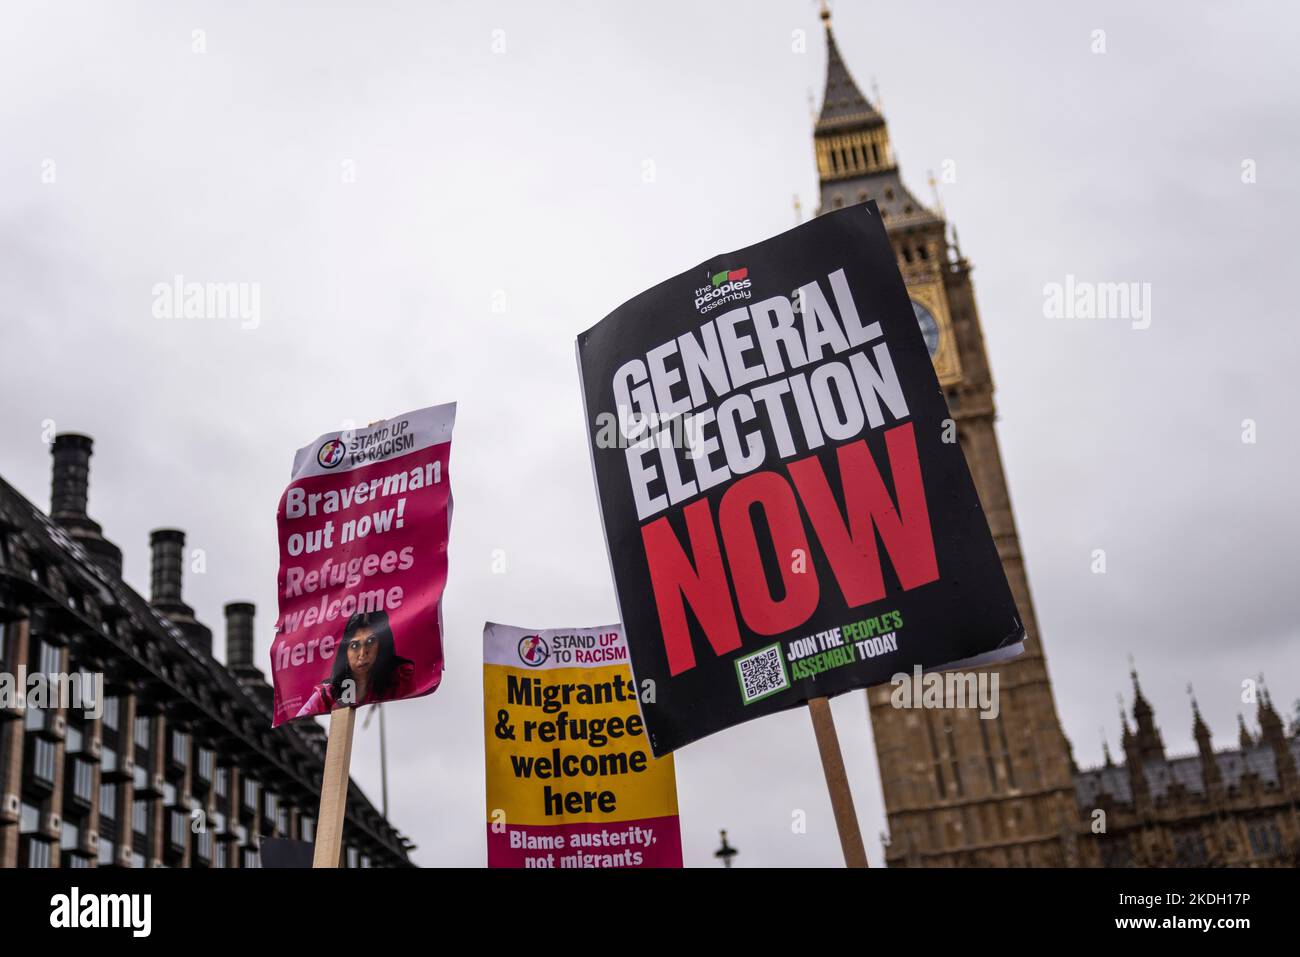 General election now sign at a protest in London against Conservative government austerity measures, calling for a general election and higher wages. Stock Photo